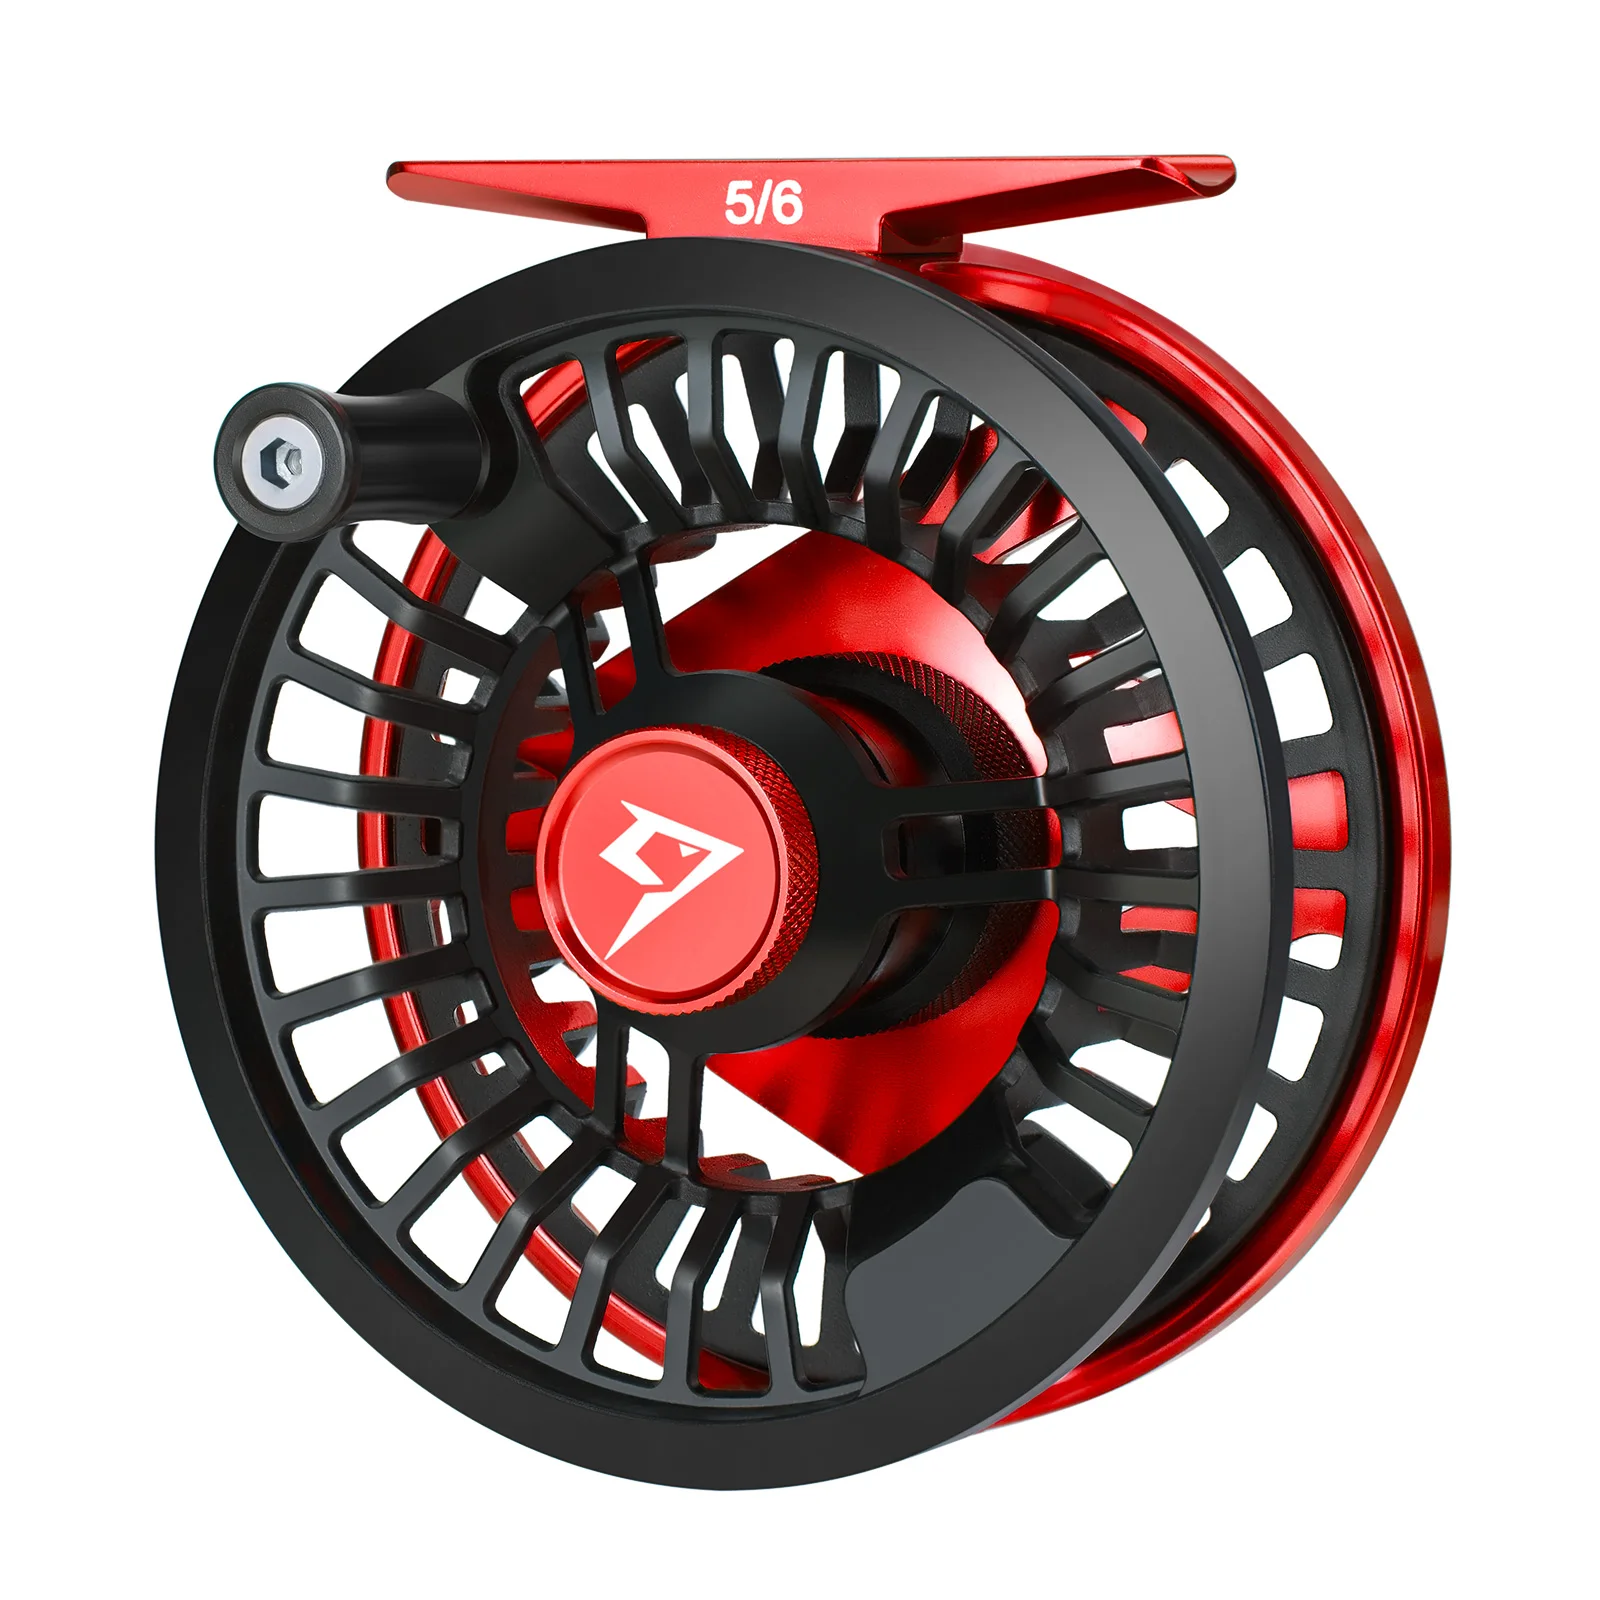 Piscifun AOKA XS Fly Fishing Reel Alumimum Alloy Body Sealed Double Click Carbon Fiber Drag System CNC Machined (Red) enlarge